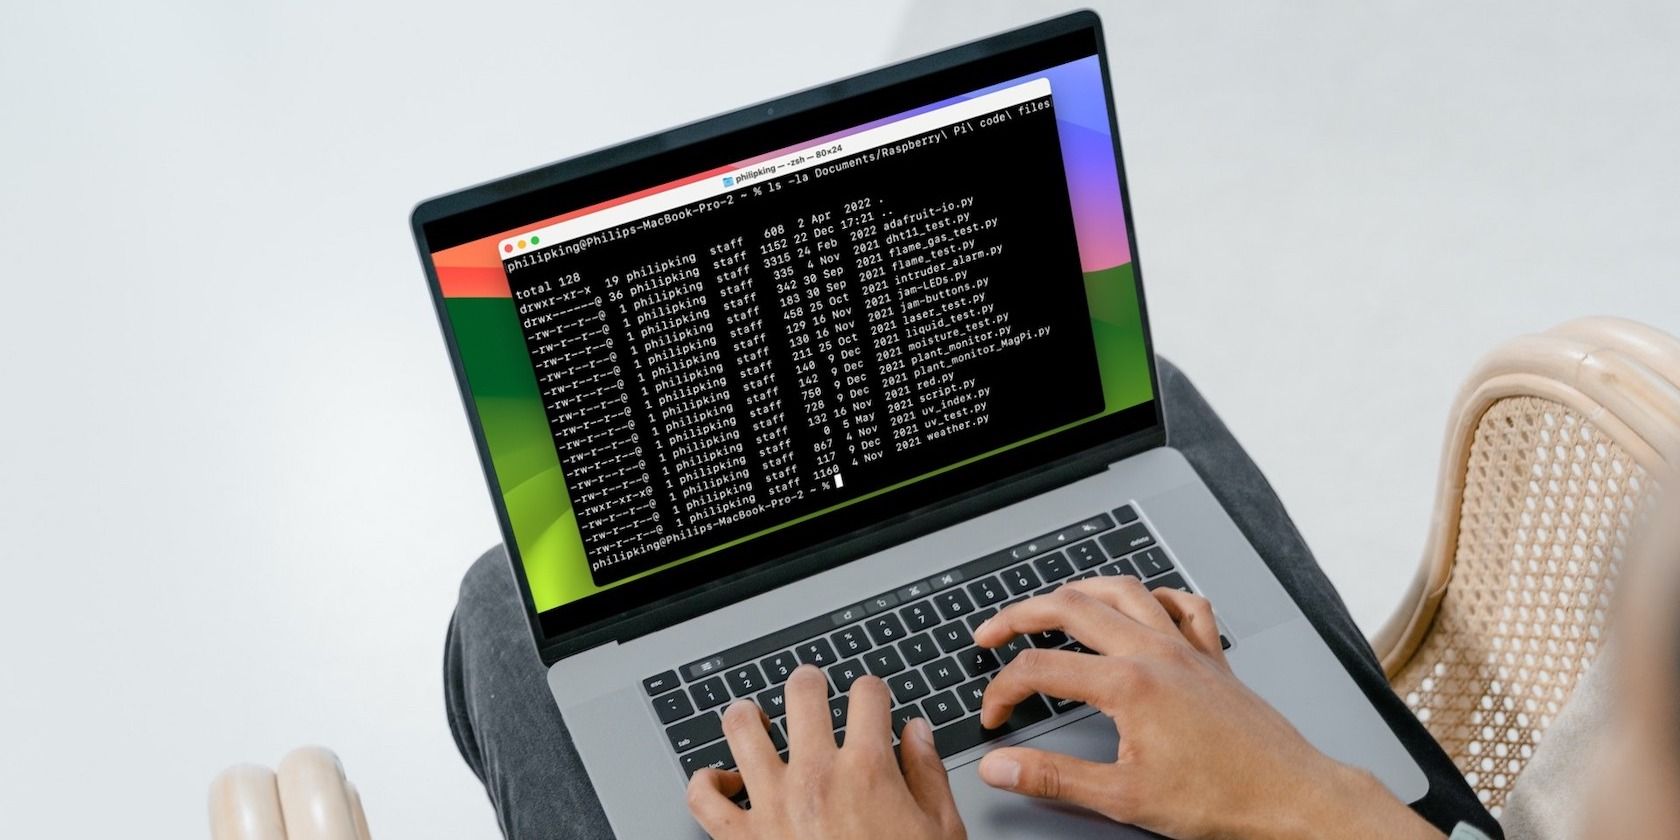 How to Use Terminal on a Mac: A Beginner’s Guide